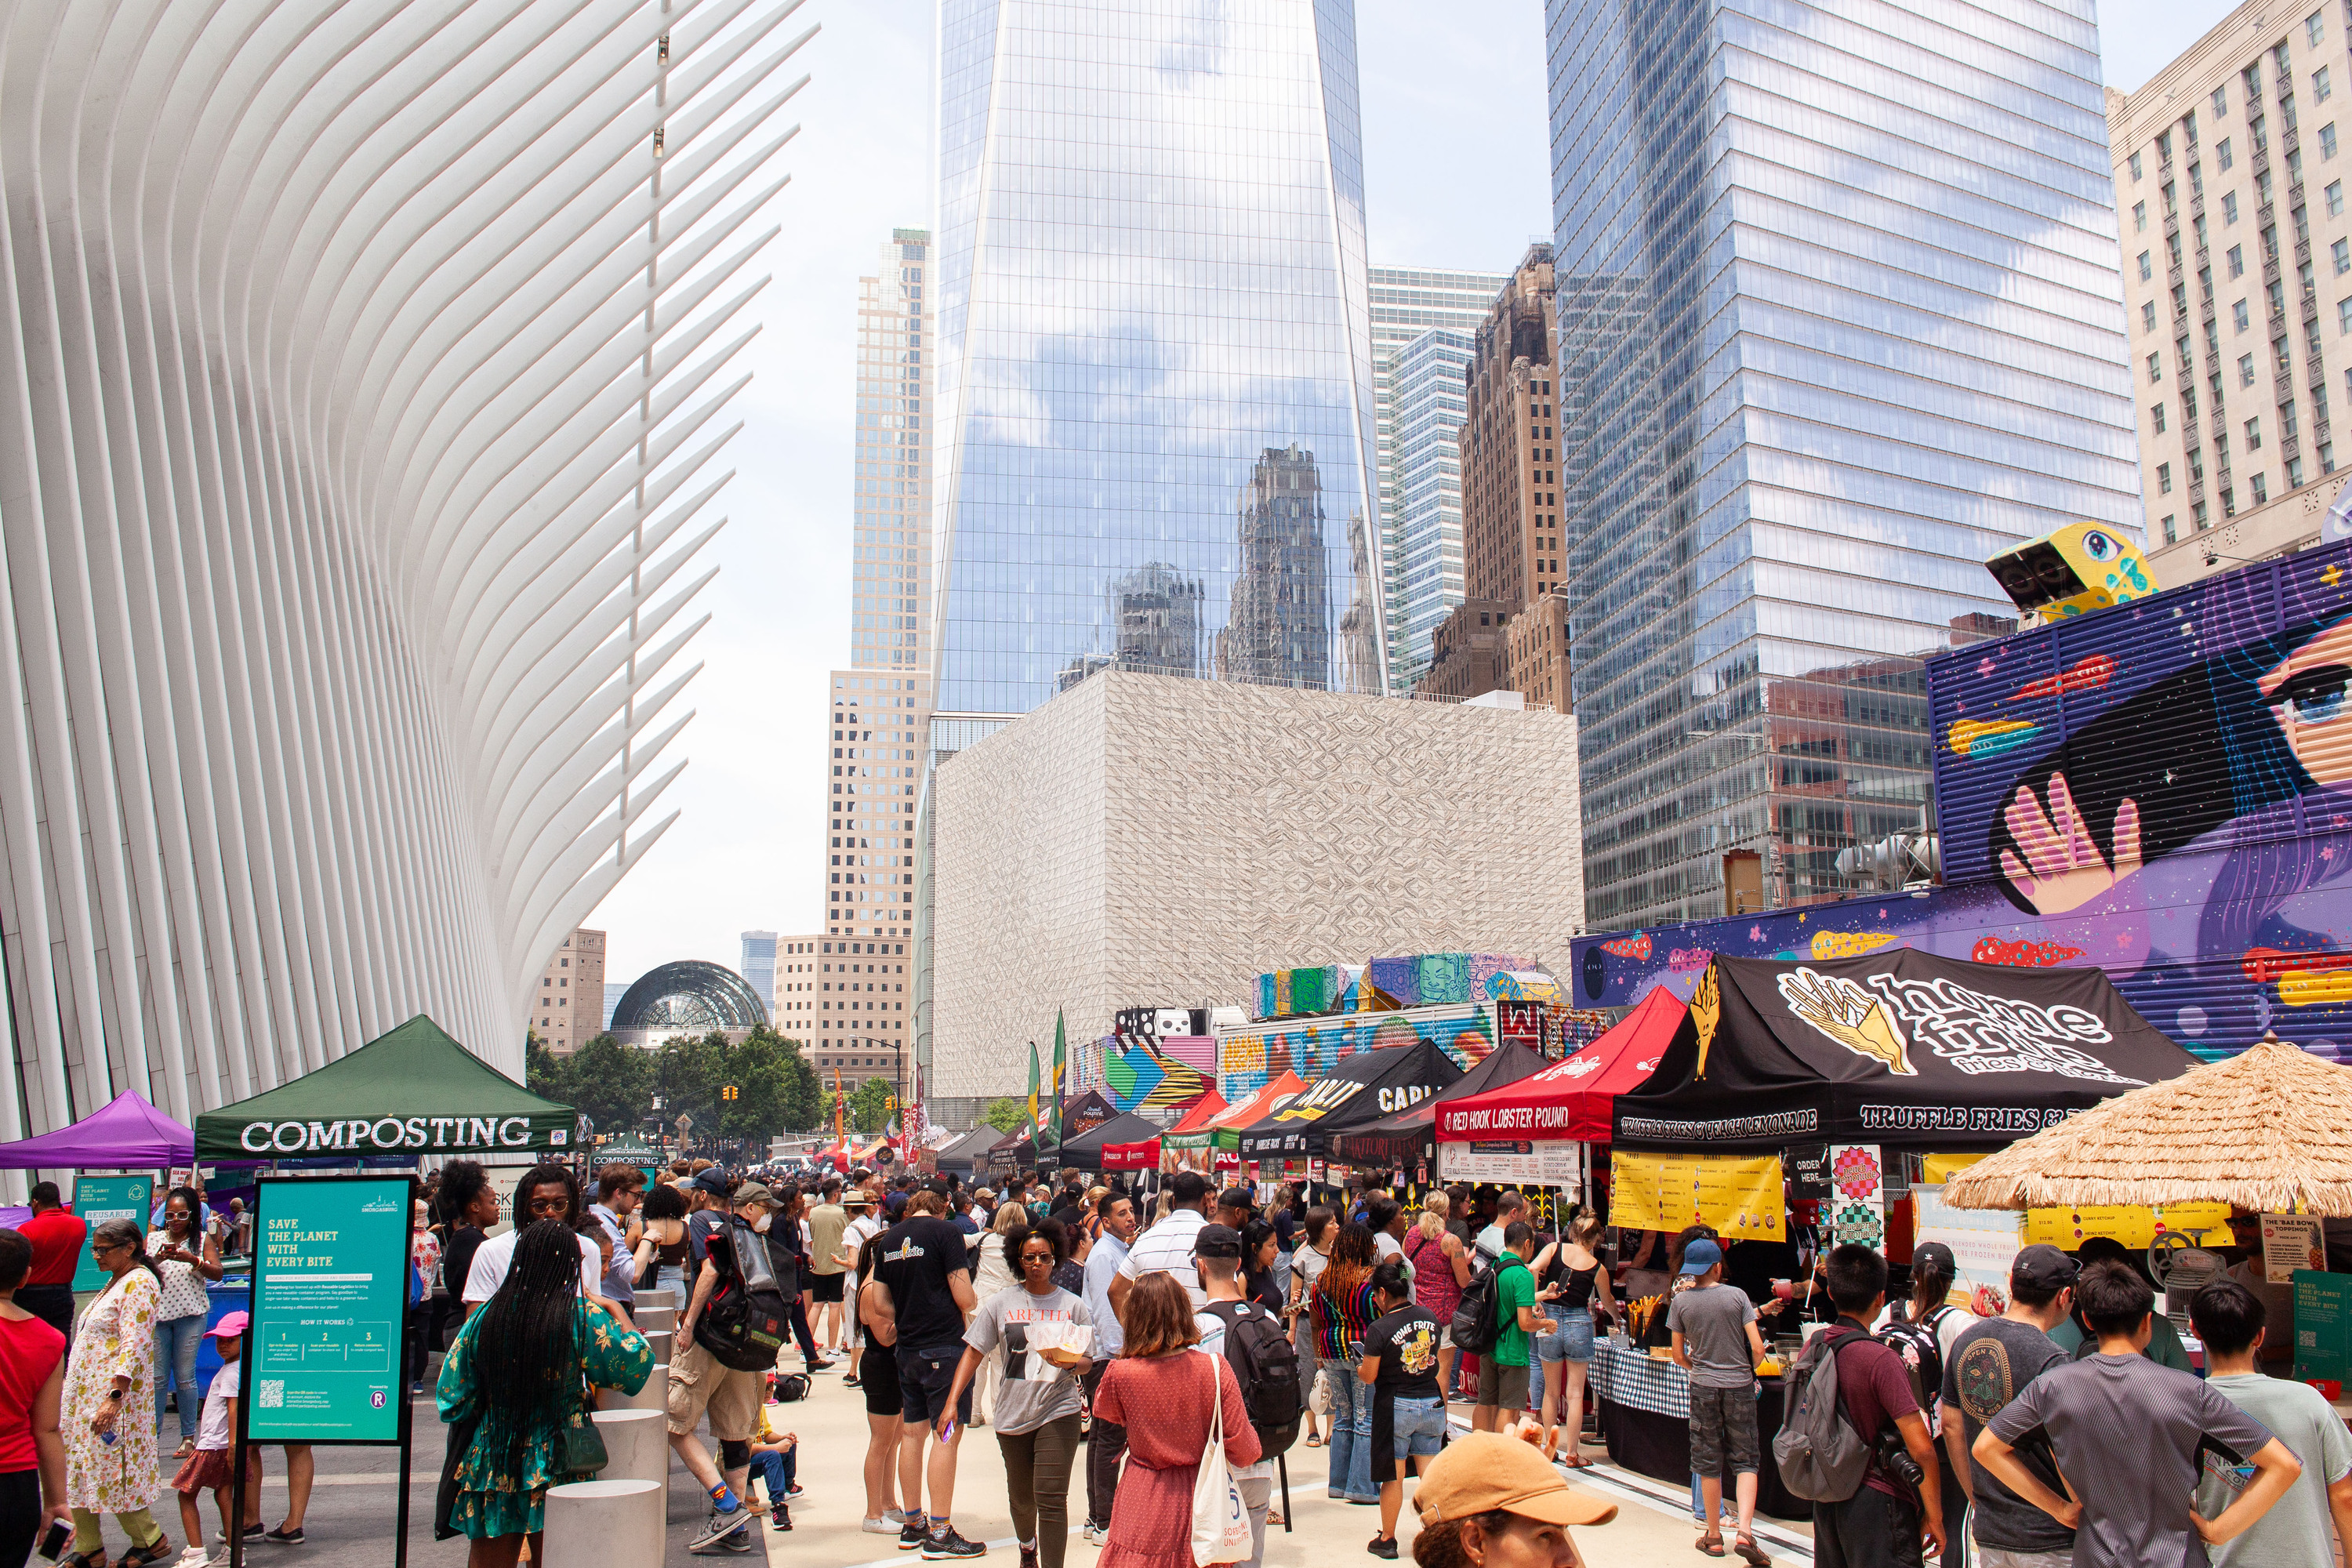 A new Smorgasburg market is opening at The Shed for the summer